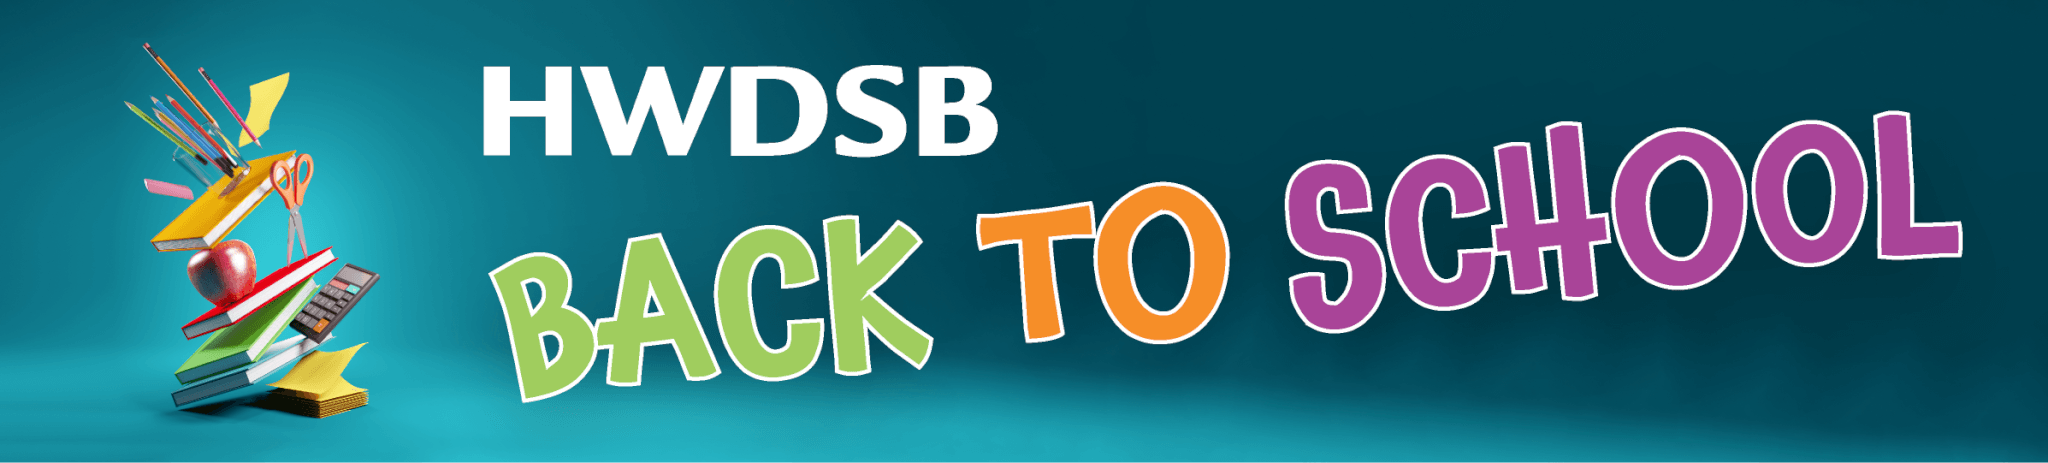 Text: HWDSB Back to School. Images include books and stationary stacked on the left side.